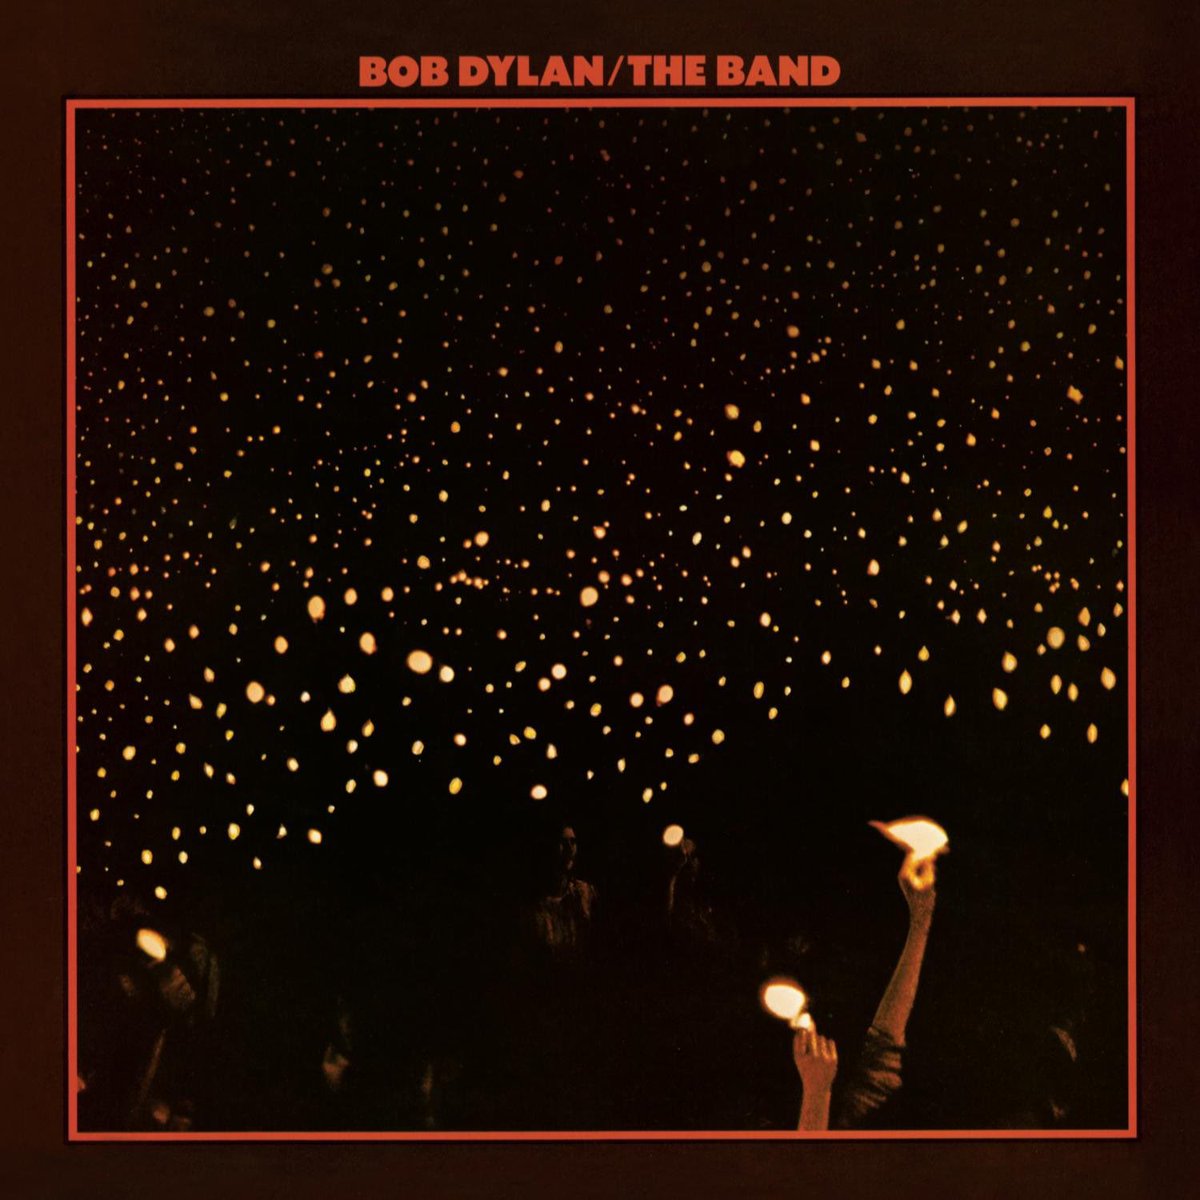 #OnThisDay in '74, Bob Dylan & The Band electrified The Forum over 2 nights & 3 shows, birthing 'Before the Flood.' Their collaboration, now an iconic live album, captured a blend of soul-stirring lyrics and vibrant sound, etching a memorable moment in rock history.